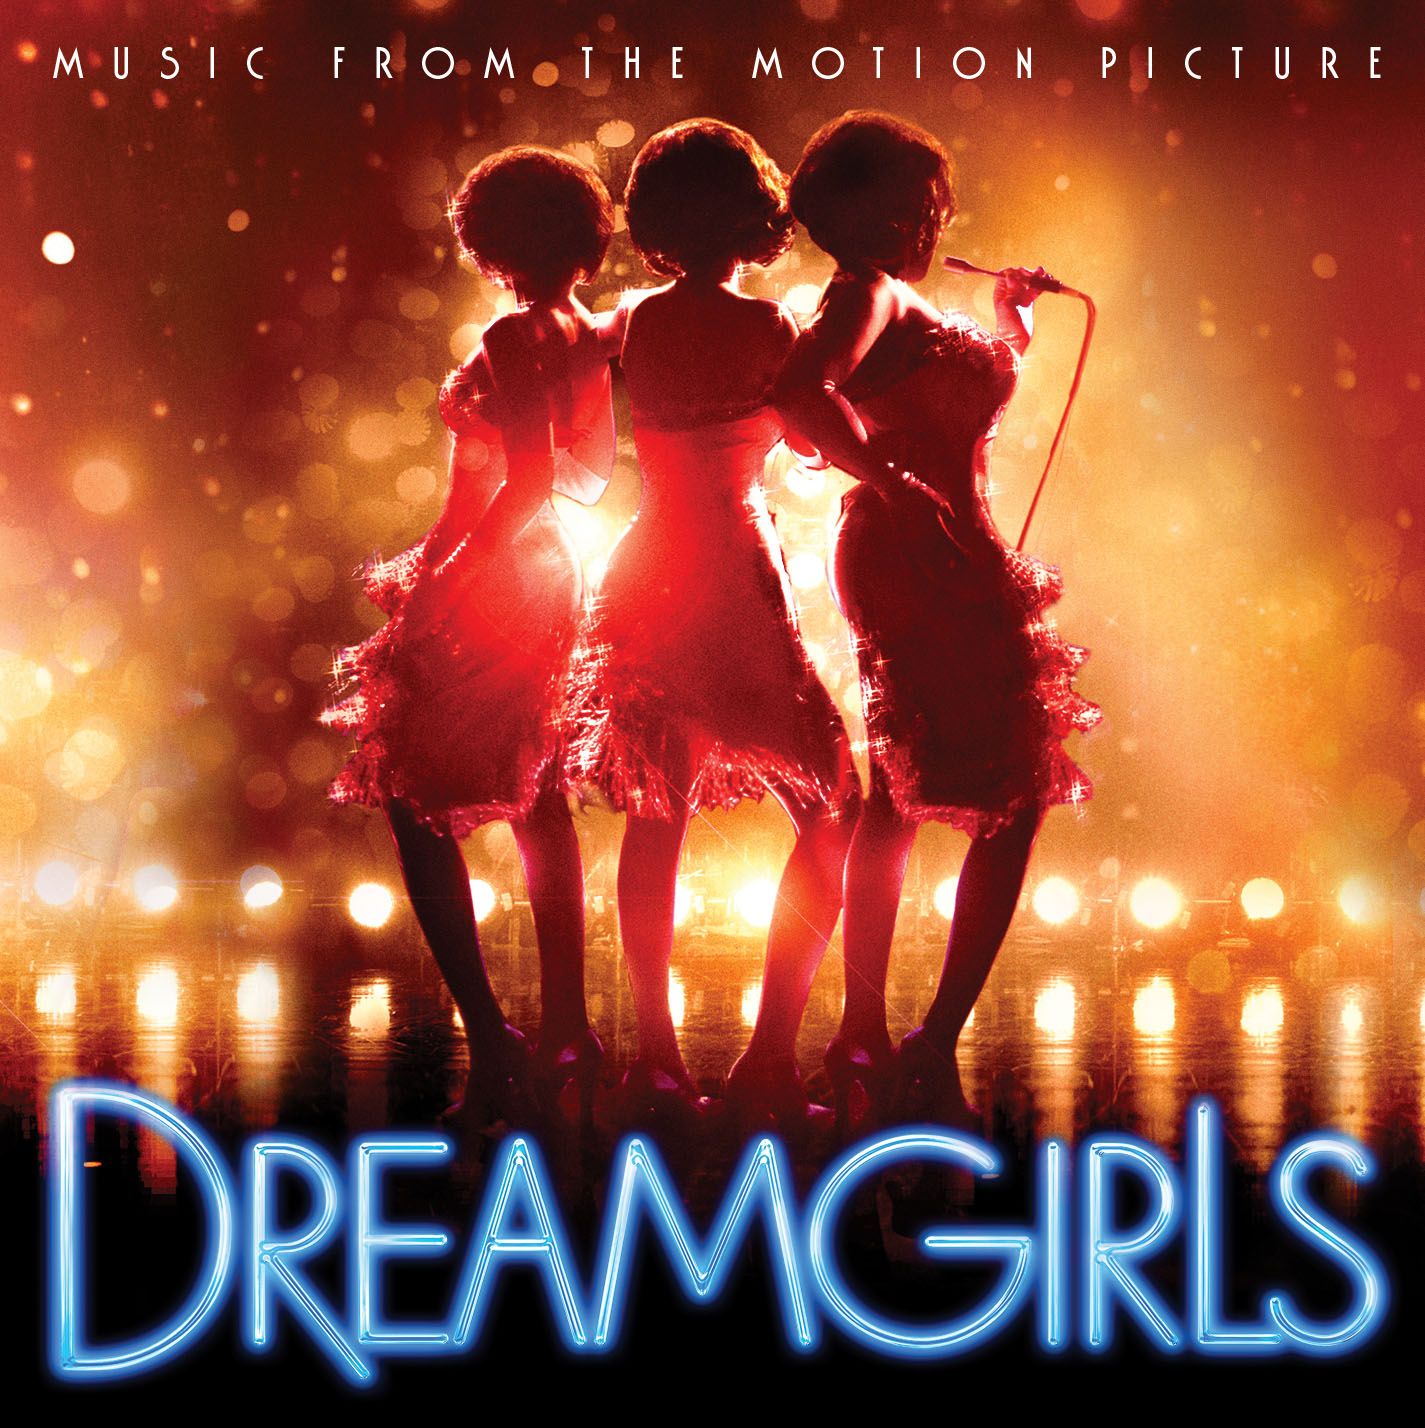 songs from the movie dreamgirls